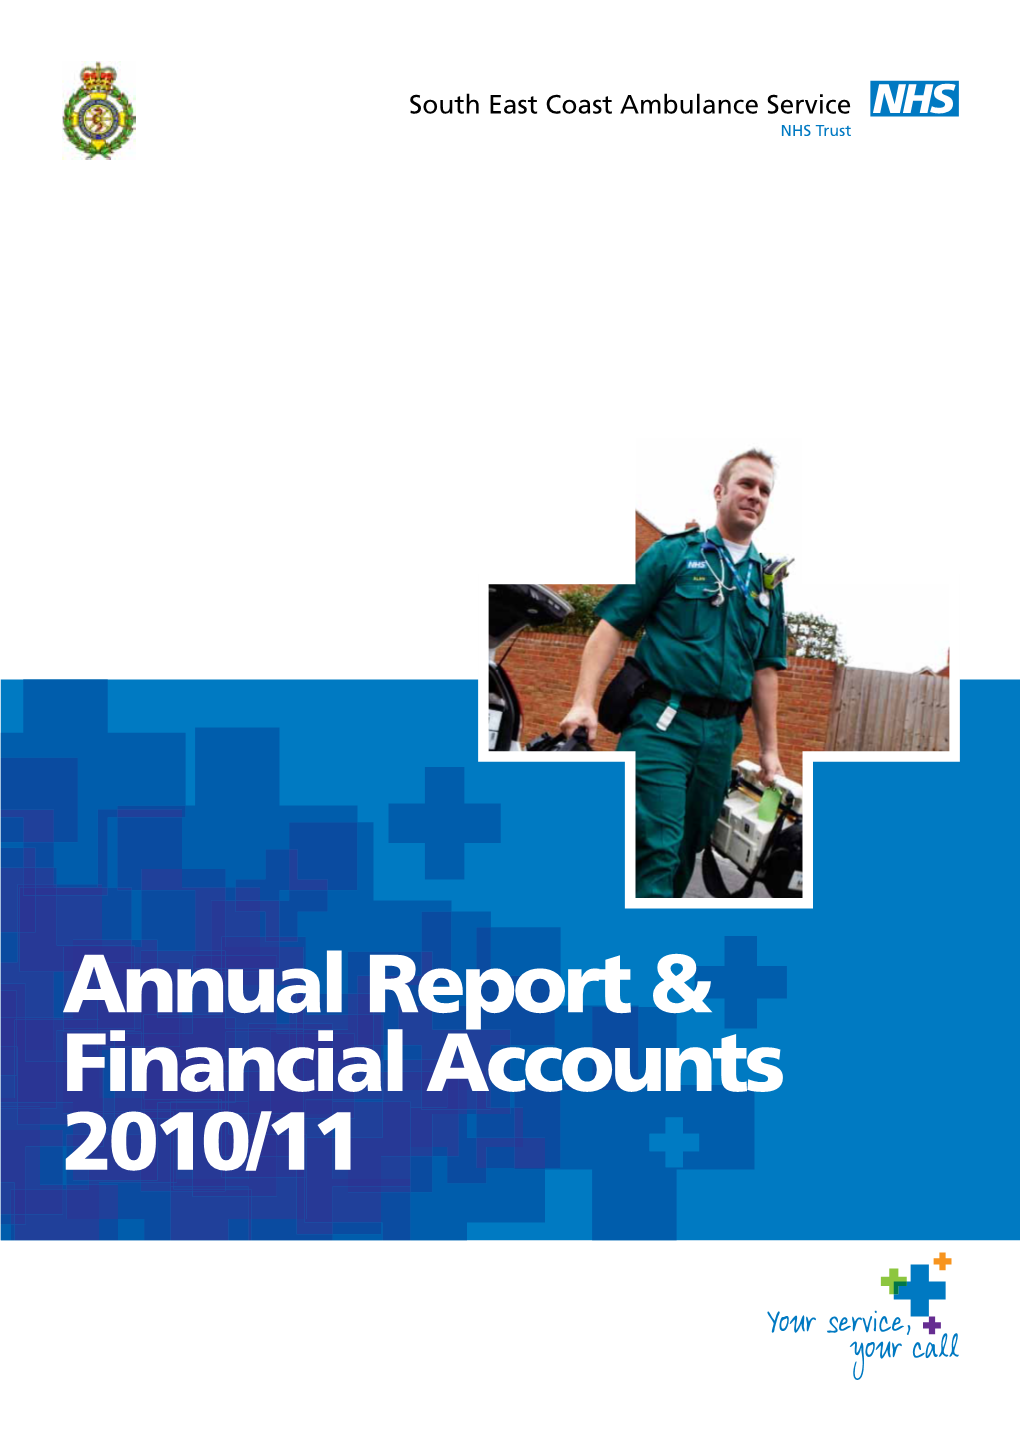 Annual Report & Financial Accounts 2010/11